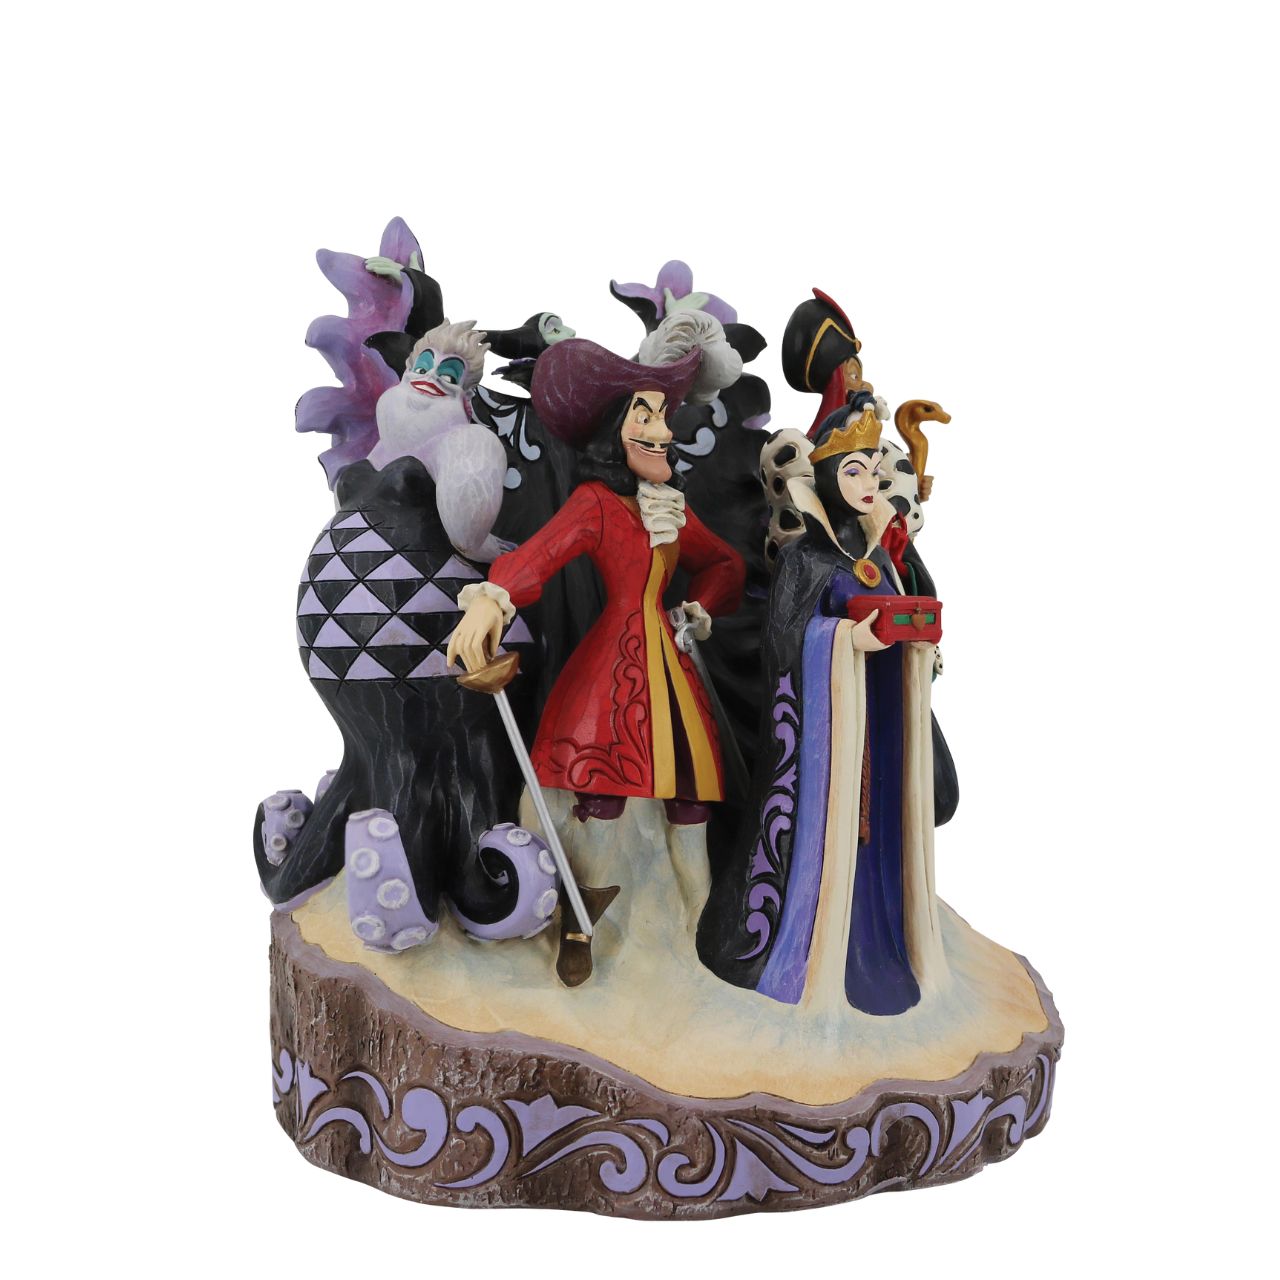 Jim Shore continues his Carved by Heart series paying homage to Disney Villains. Designed by award-winning artist and sculptor, Jim Shore for the Disney Tradition brand. The figurine is made from resin.